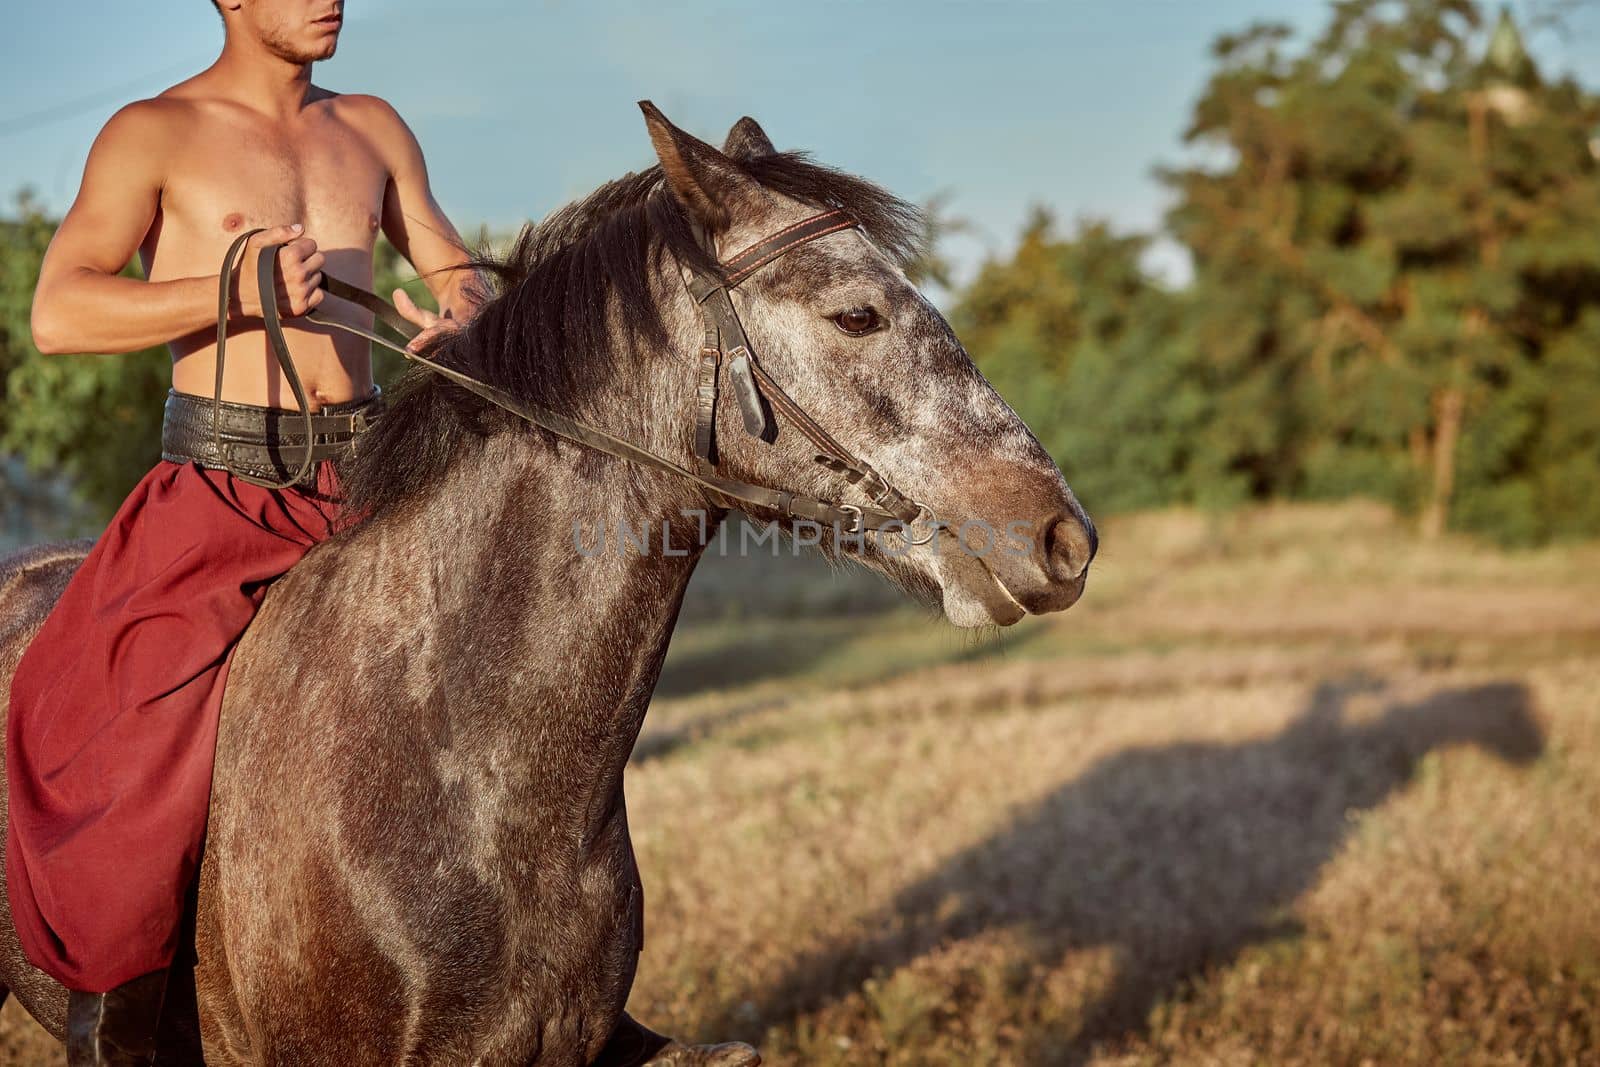 Handsome man cowboy riding on a horse - background of sky and trees. A man in red wide pants without a shirt. Show